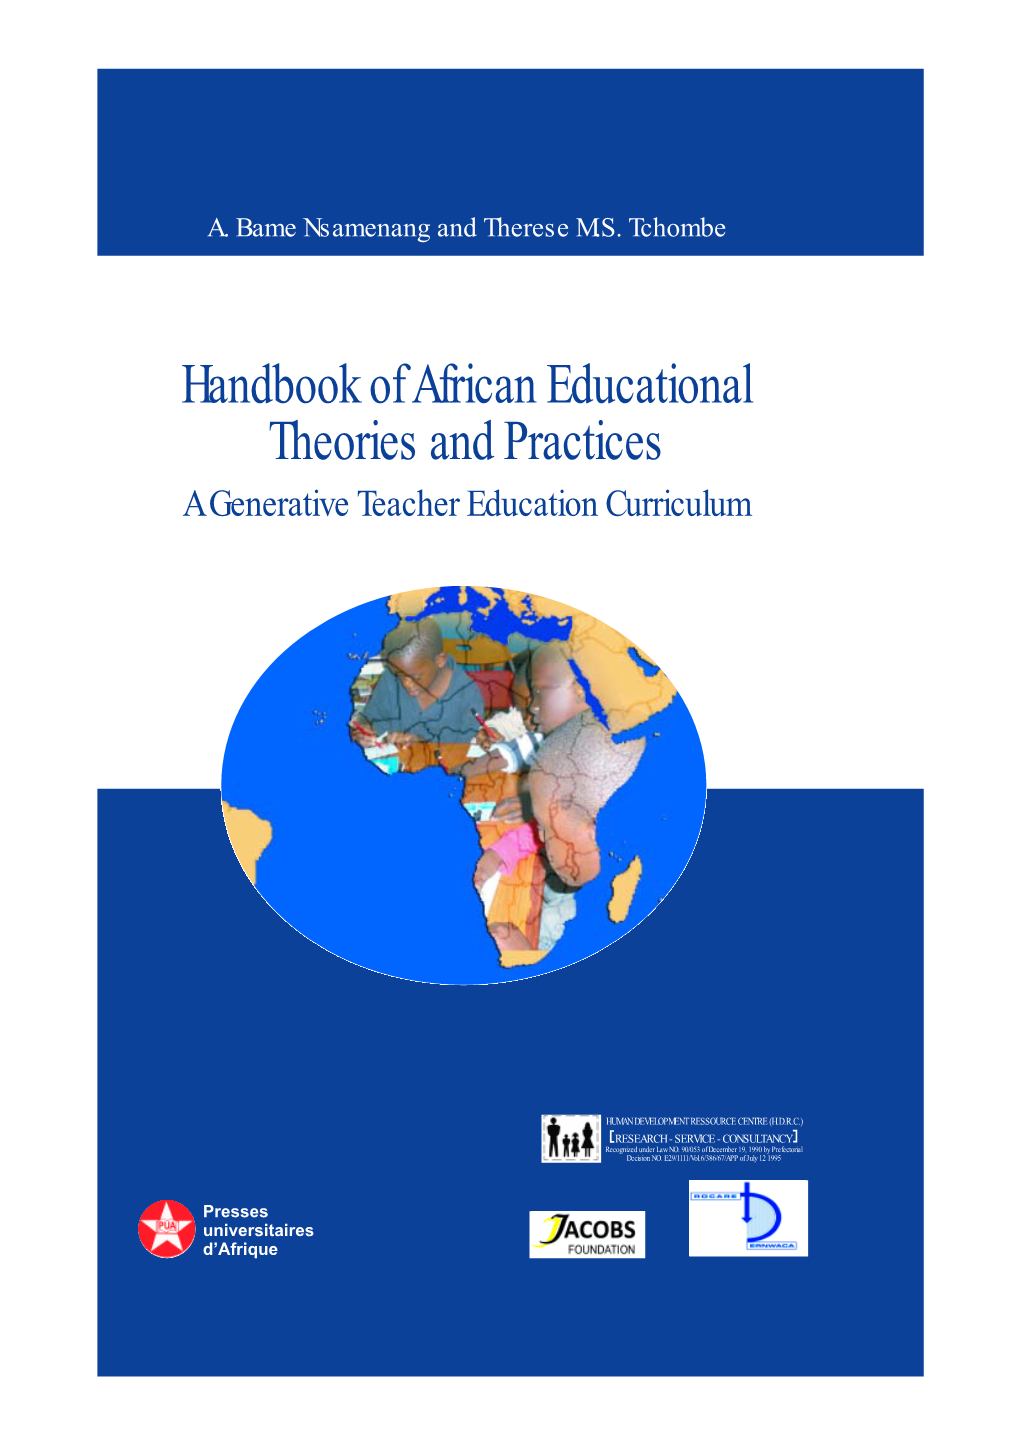 Jacobs Foundation Handbook African Educational Theories and Practices